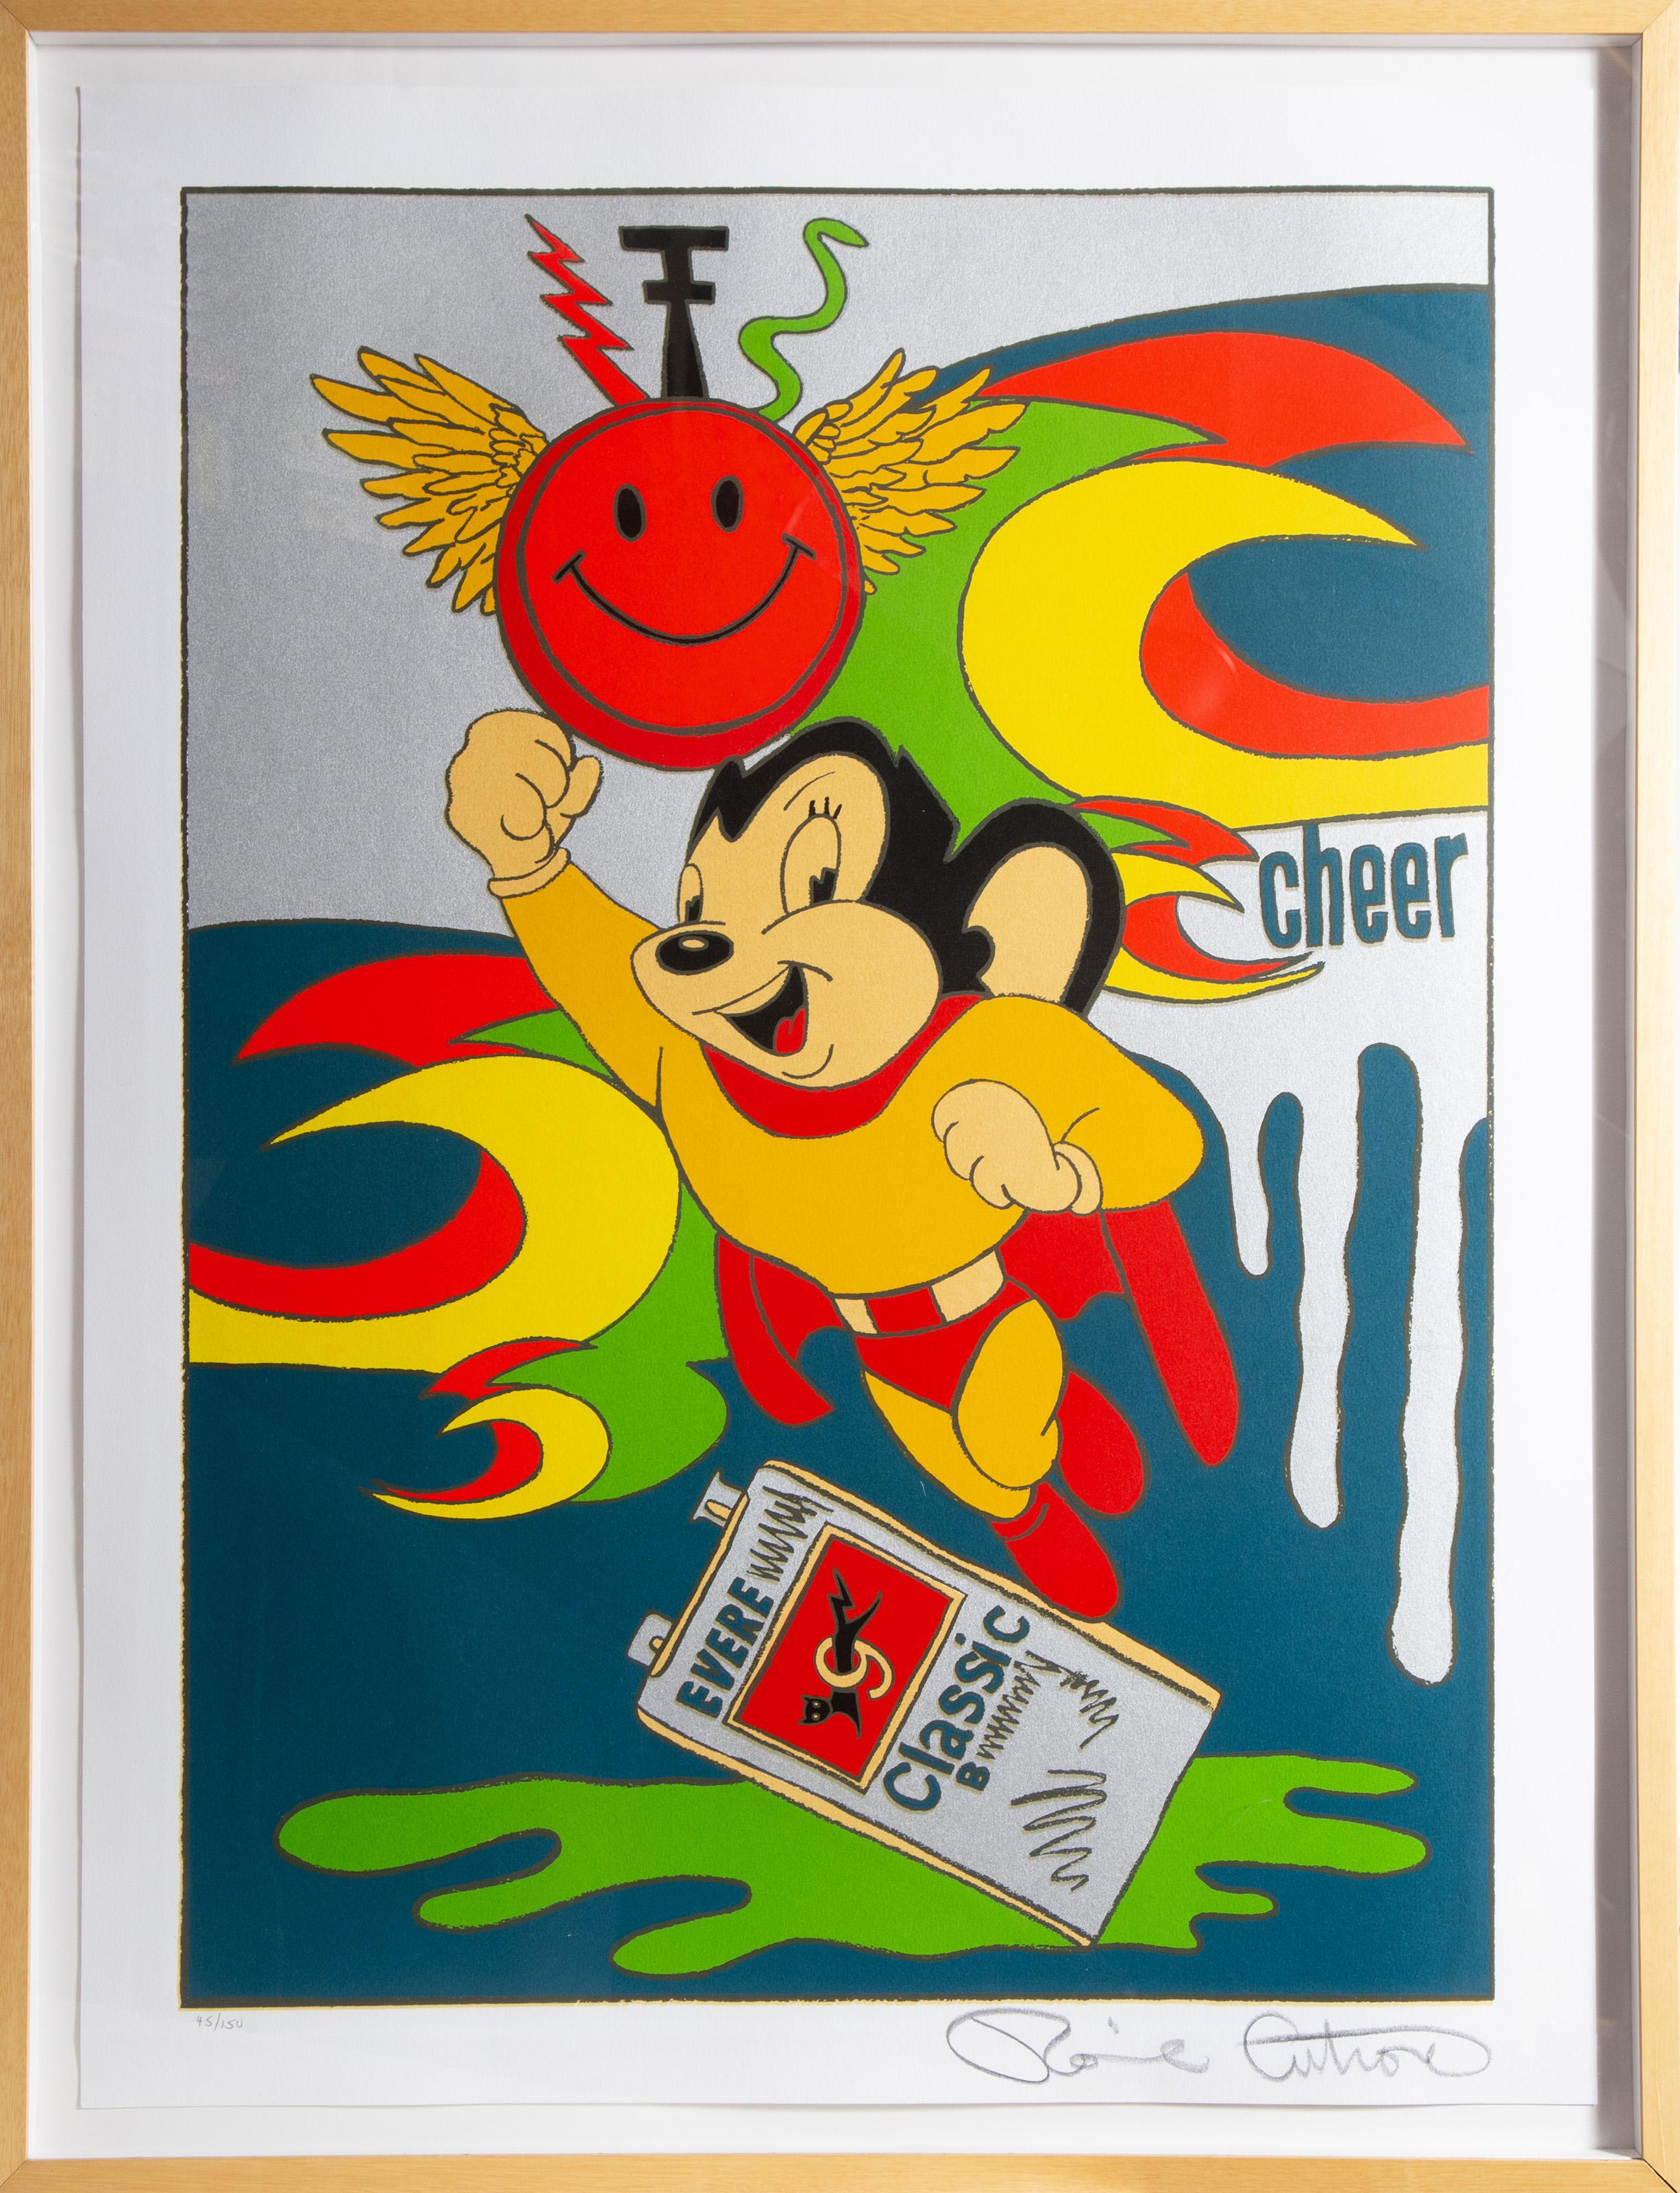 Mighty Mouse
Ronnie Cutrone, American (1948–2013)
Screenprint, signed and numbered in pencil
Edition of 45/150
Image Size: 36 x 26 inches
Size: 40 x 30 in. (101.6 x 76.2 cm)
Frame Size: 43.5 x 33.5 inches